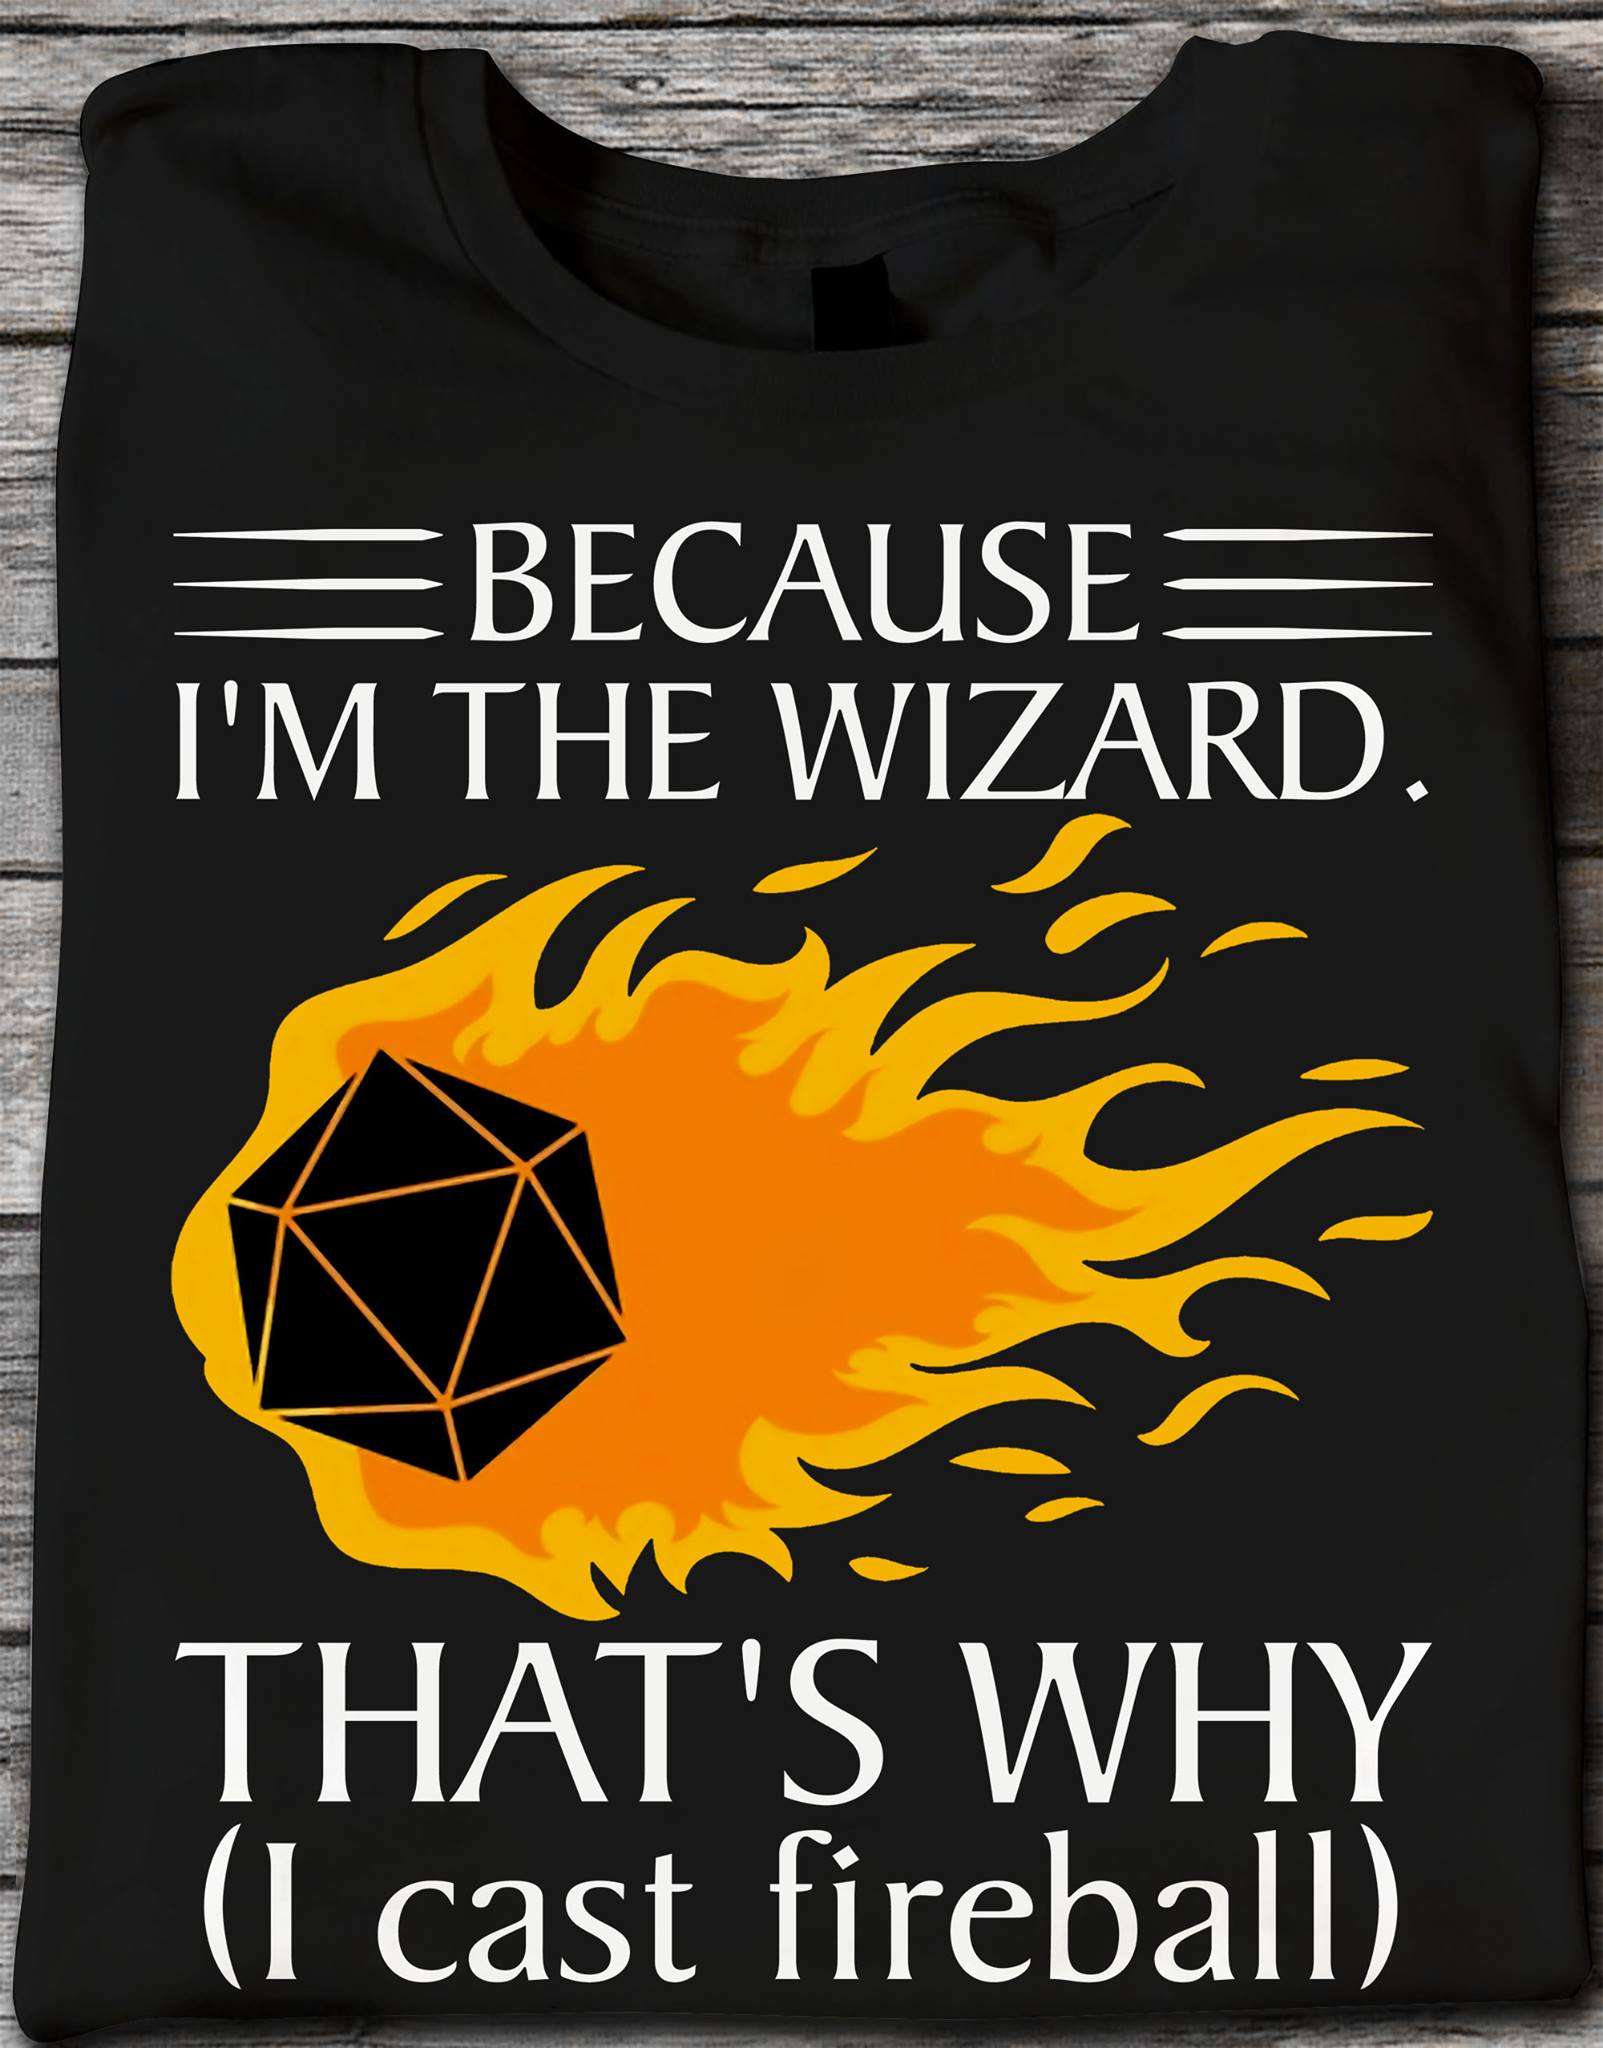 Because I'm the wizard that's why I cast fireball - Fireball casting, roll initiative